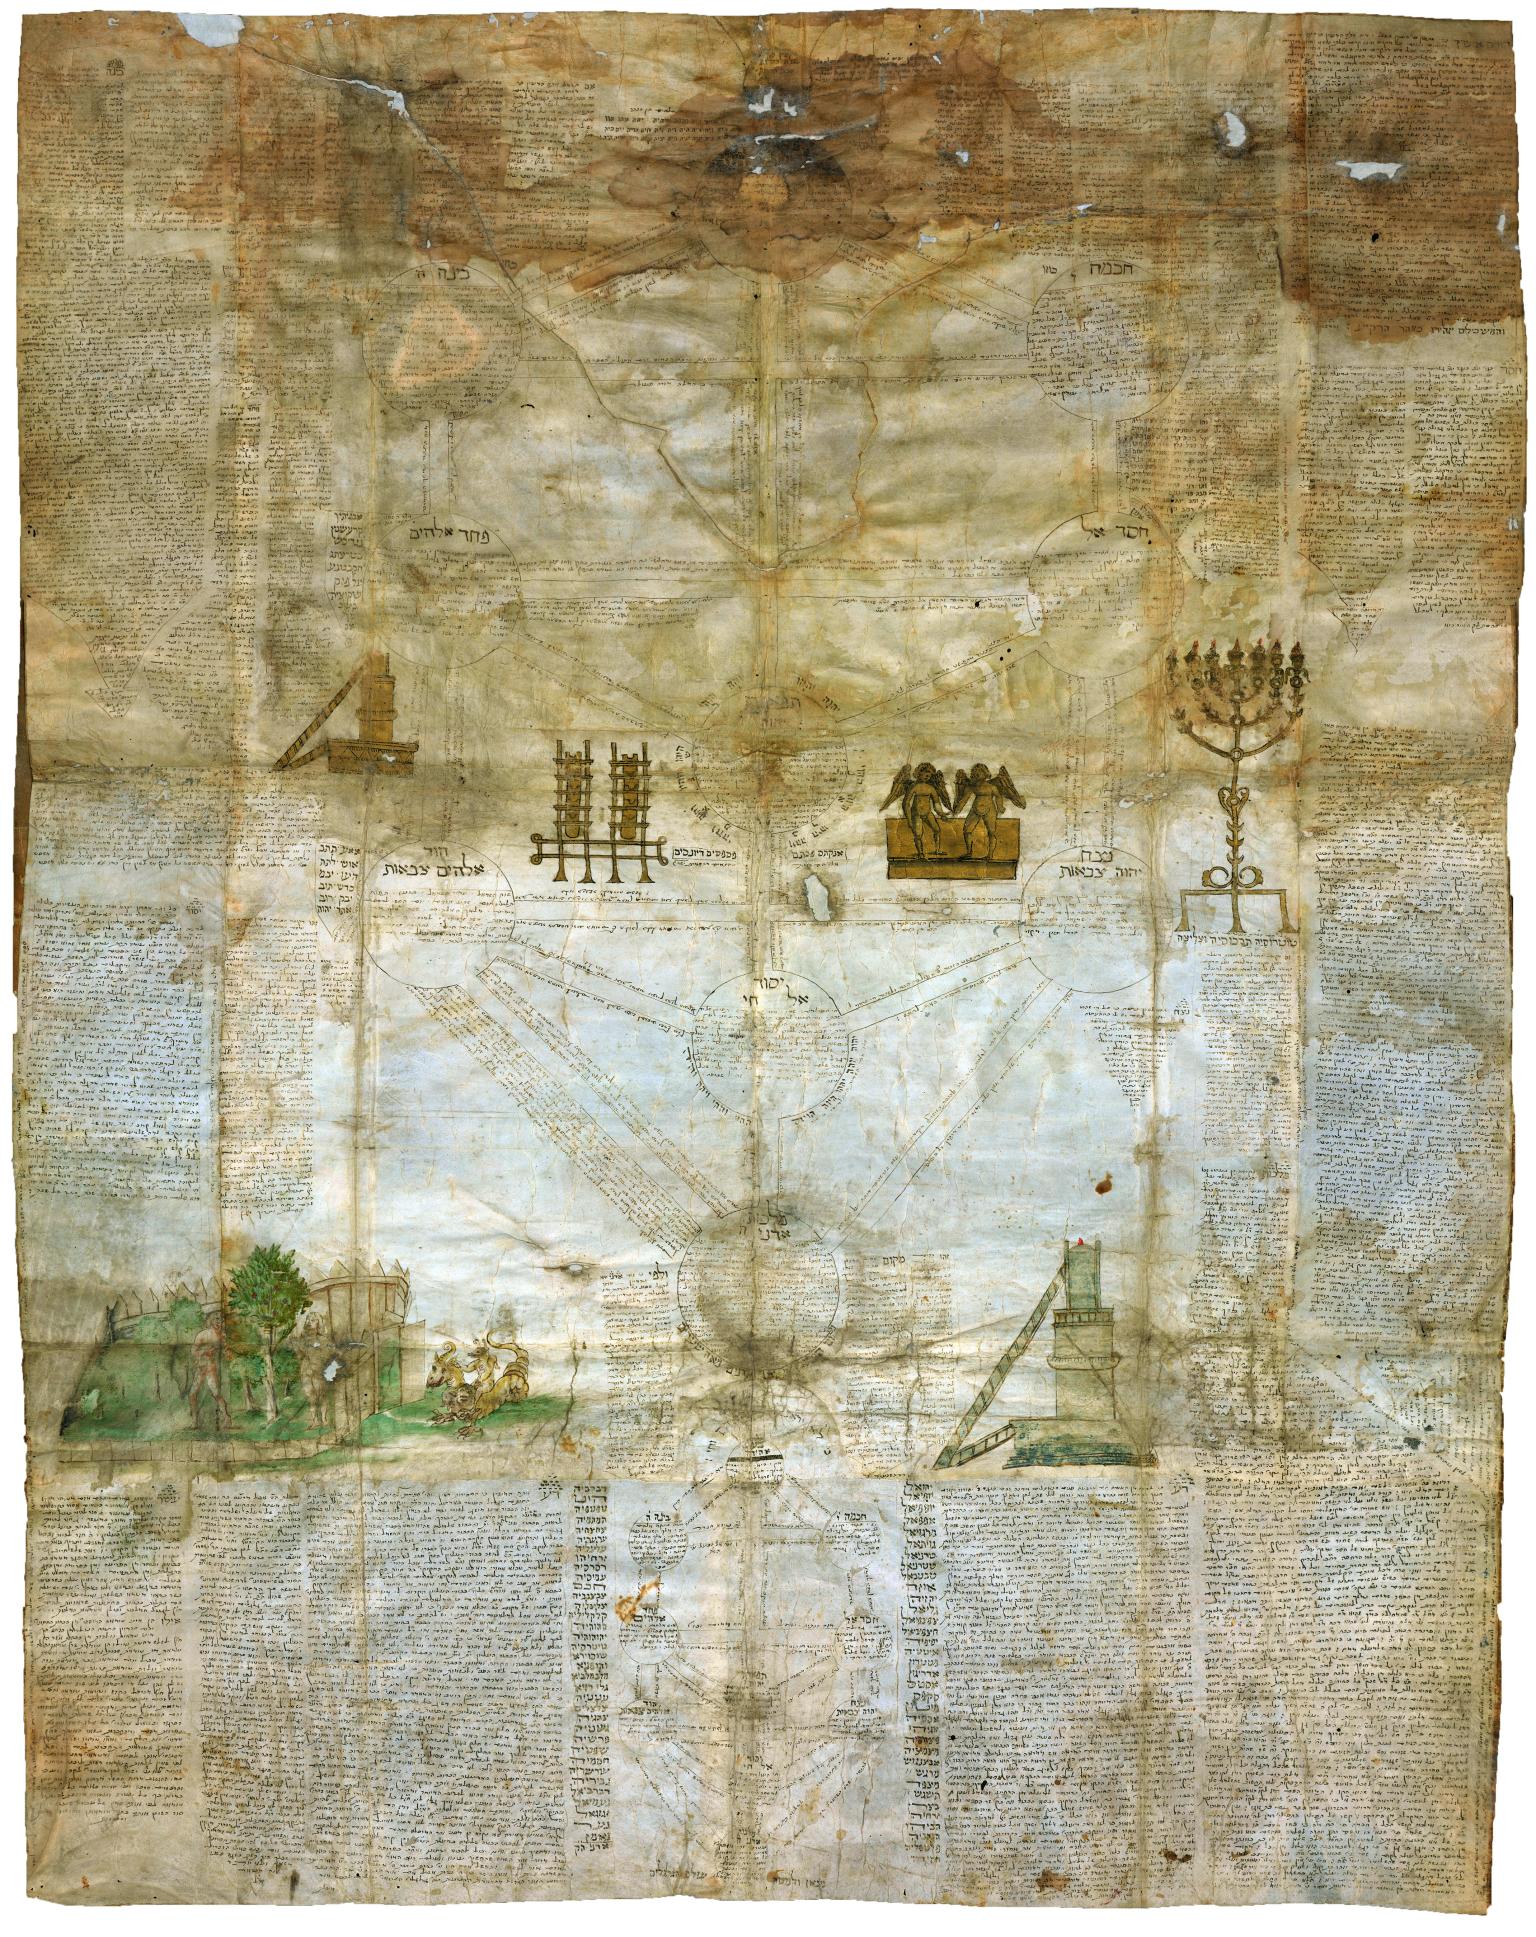 Manuscript page with Hebrew writing arranged in the form of a tree, with drawings of candelabrum, cherubs, and table in center, and drawing of dragon and figures on bottom left of the page. 